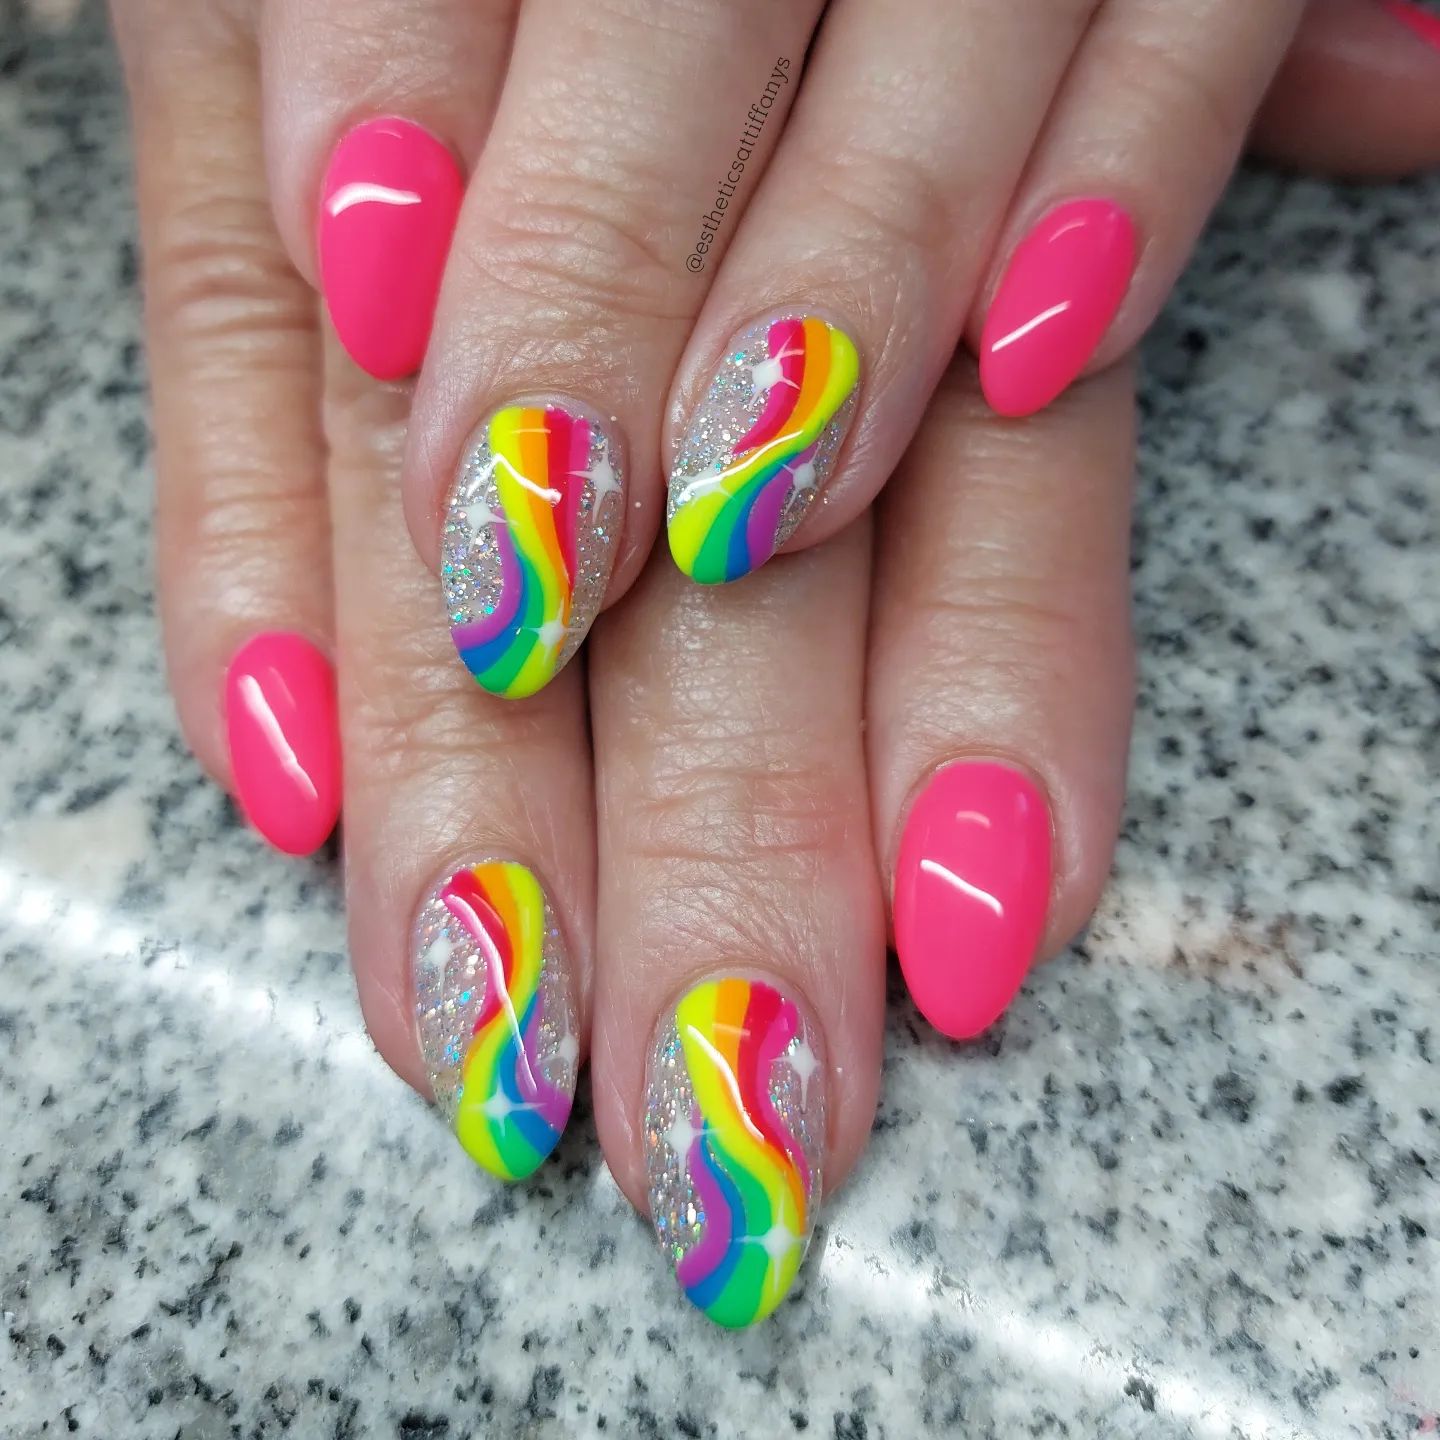 These nails look like they belong to a pinky world where unicorns live, don't they? Glittered rainbow accent nails are fabulous with pink nails.